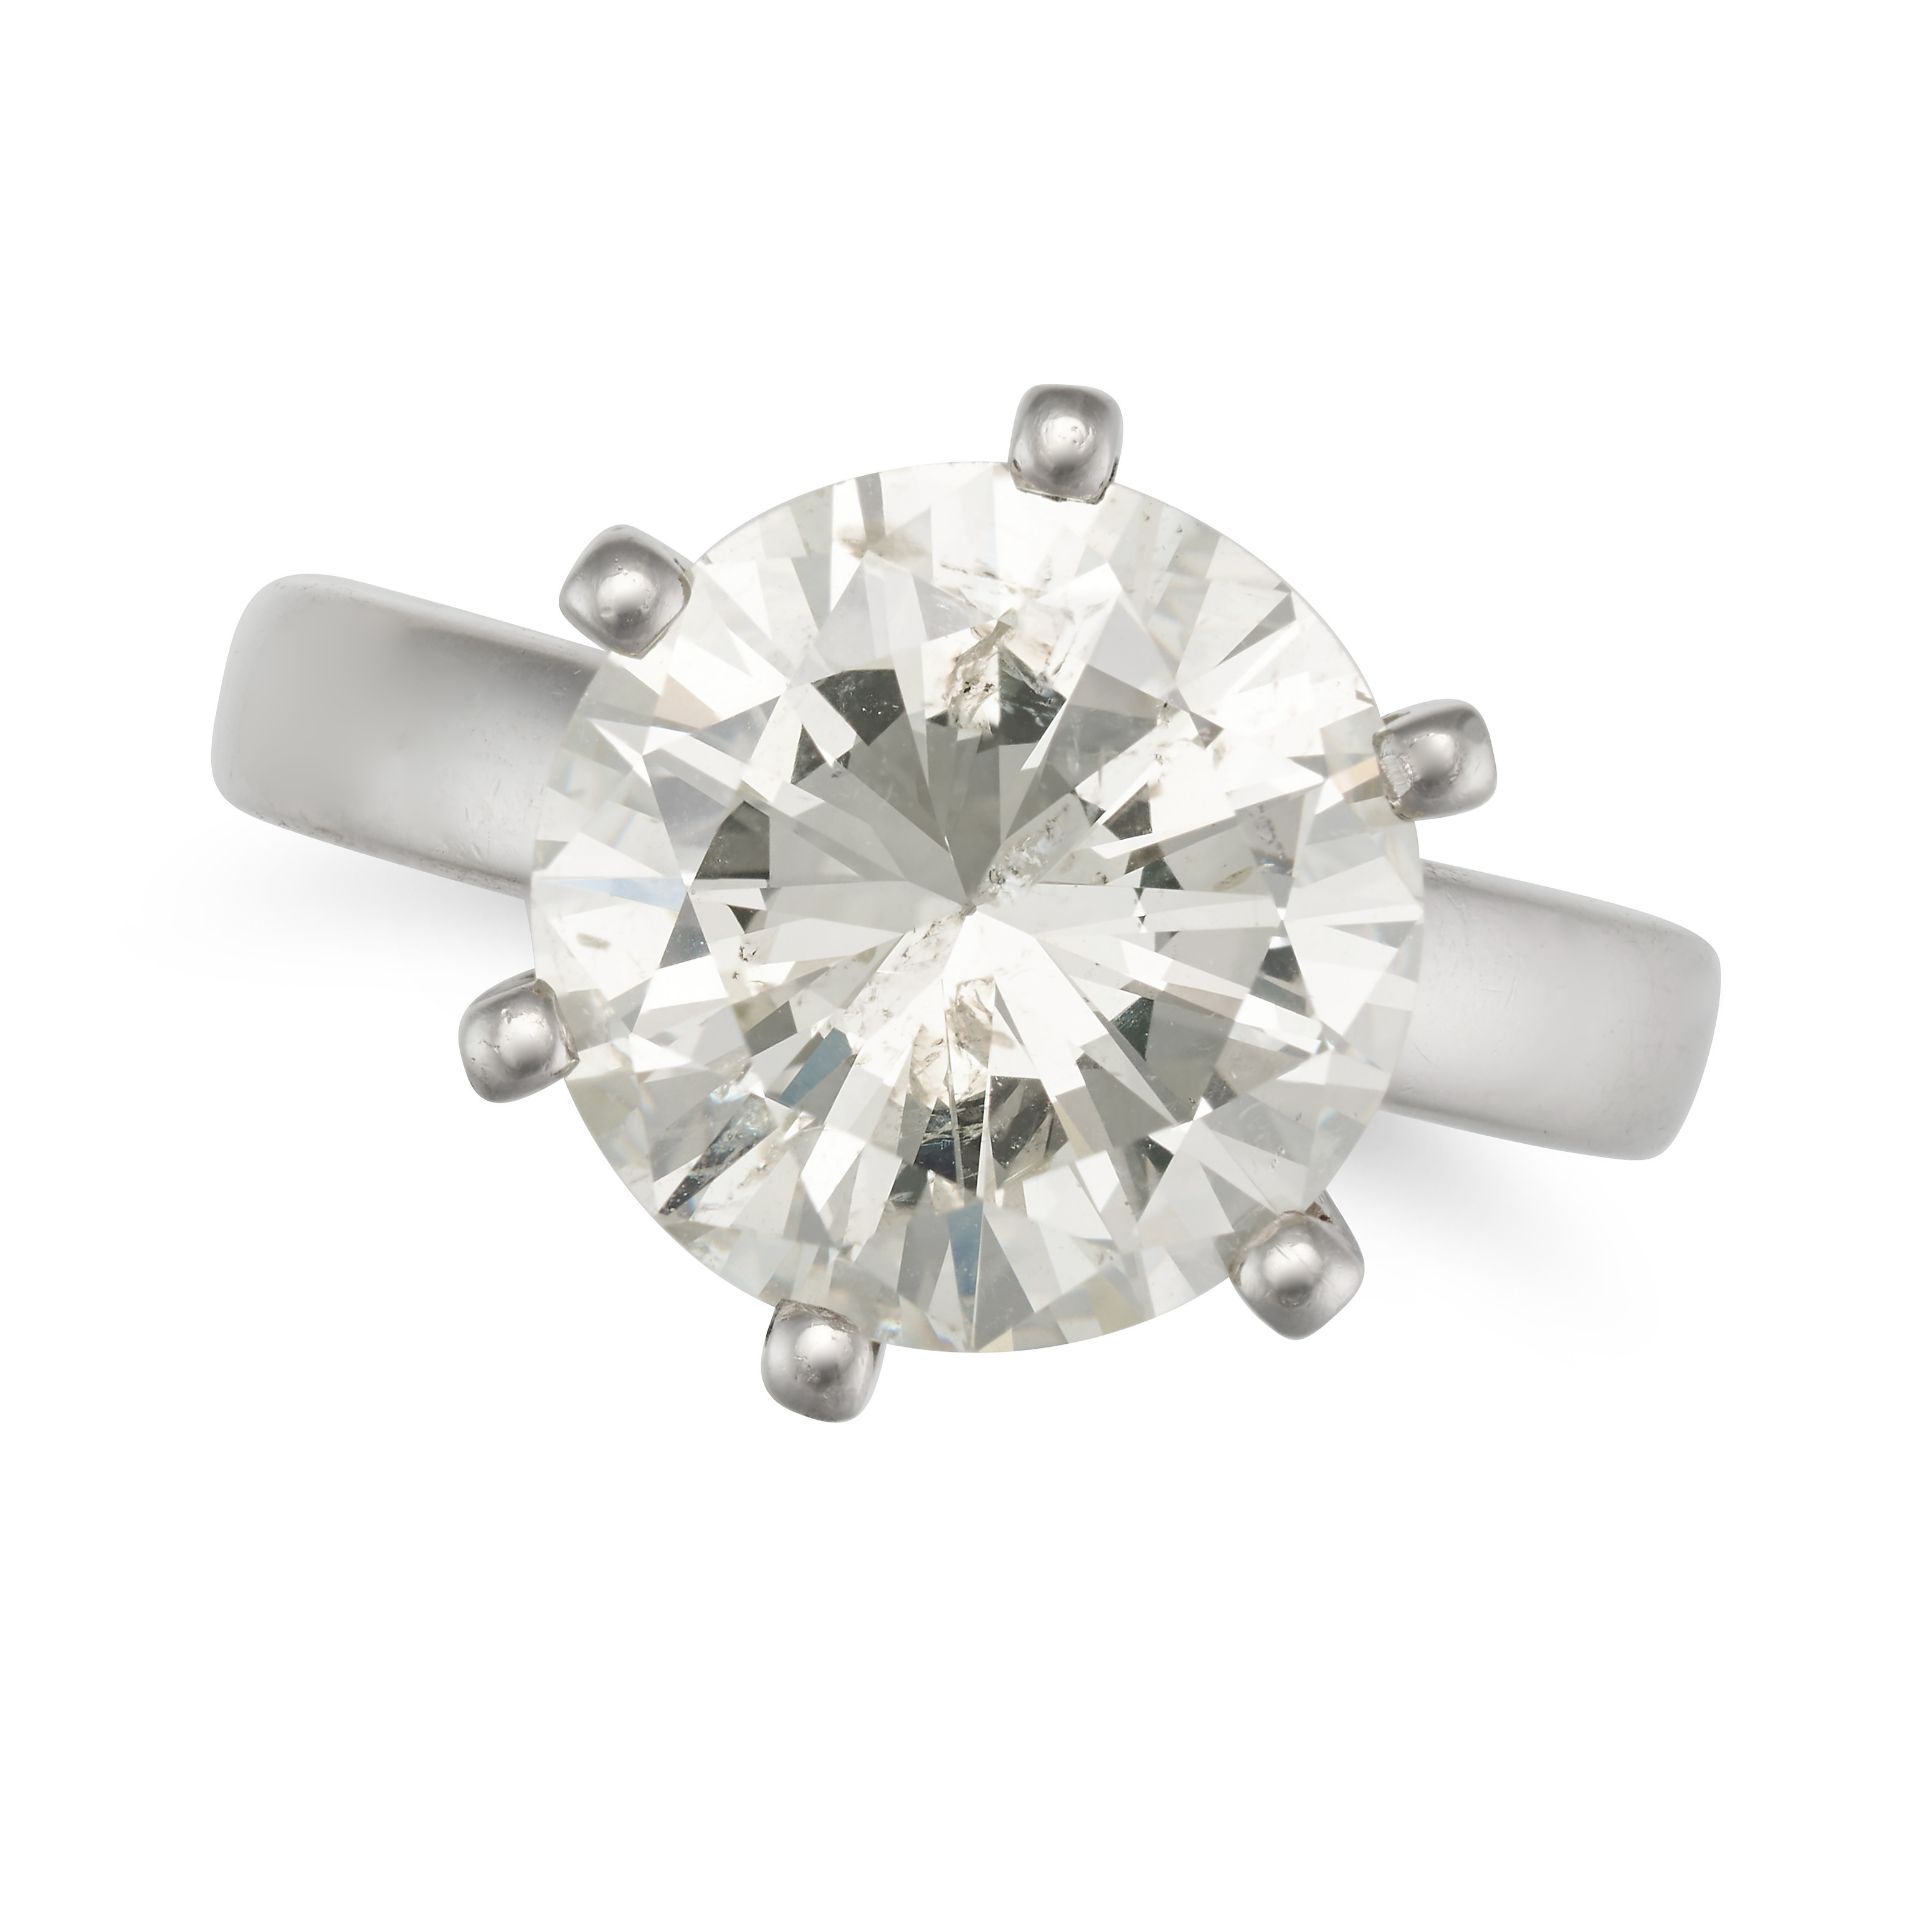 A SOLITAIRE DIAMOND RING in platinum, set with a round brilliant cut diamond of 5.68 carats, stam...